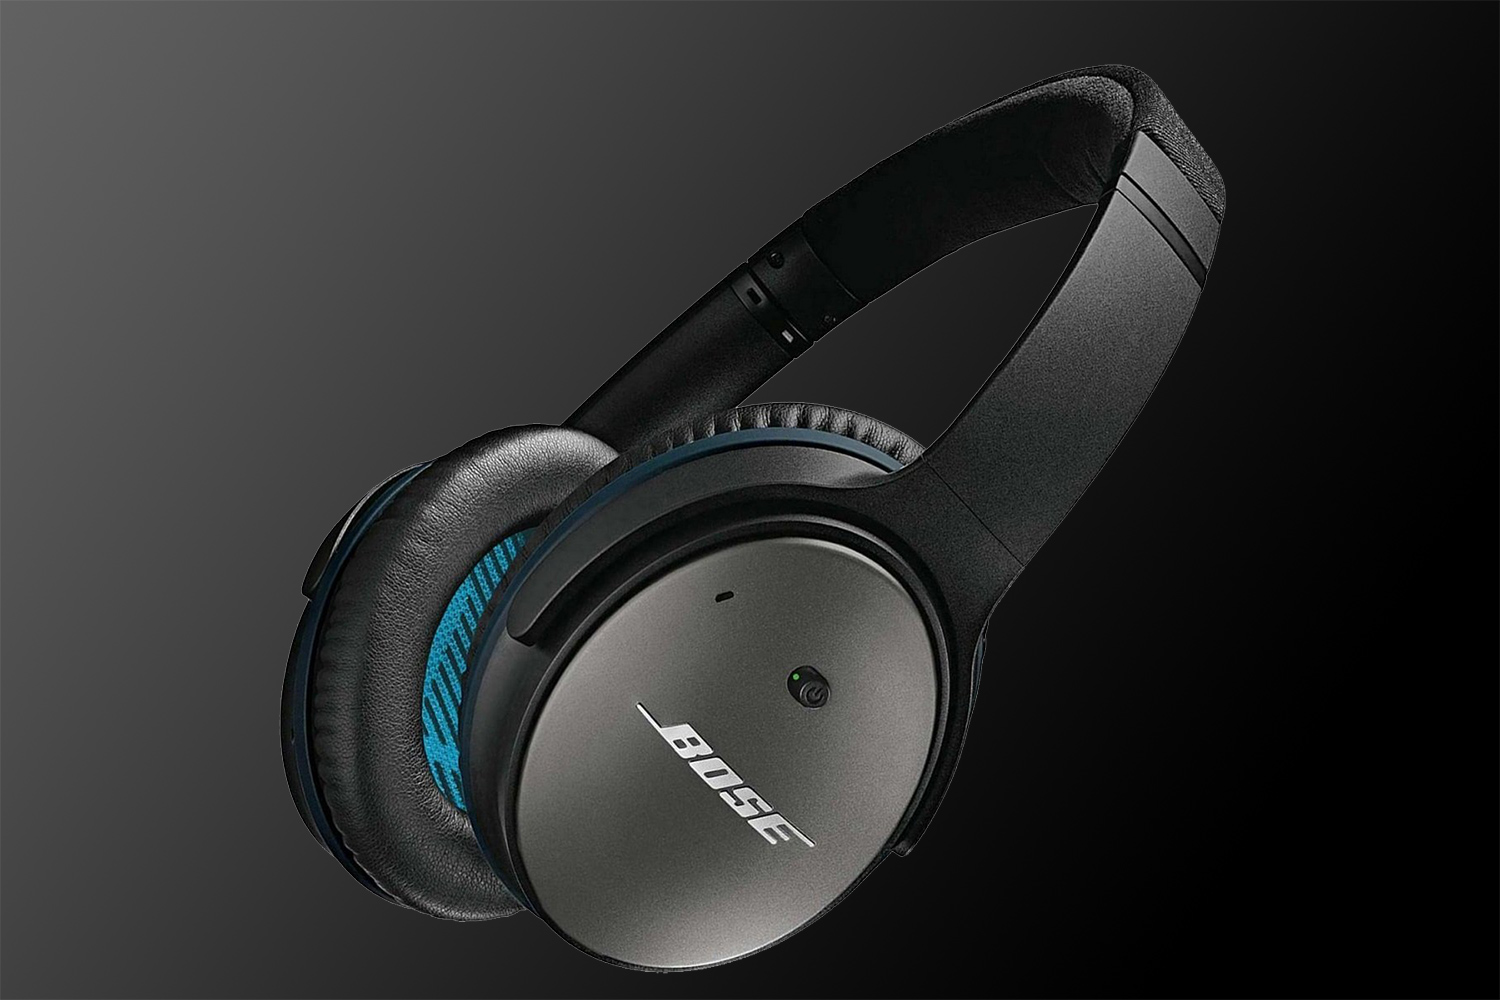 Bose's best wired headphones are half off on Amazon, and we'll show you